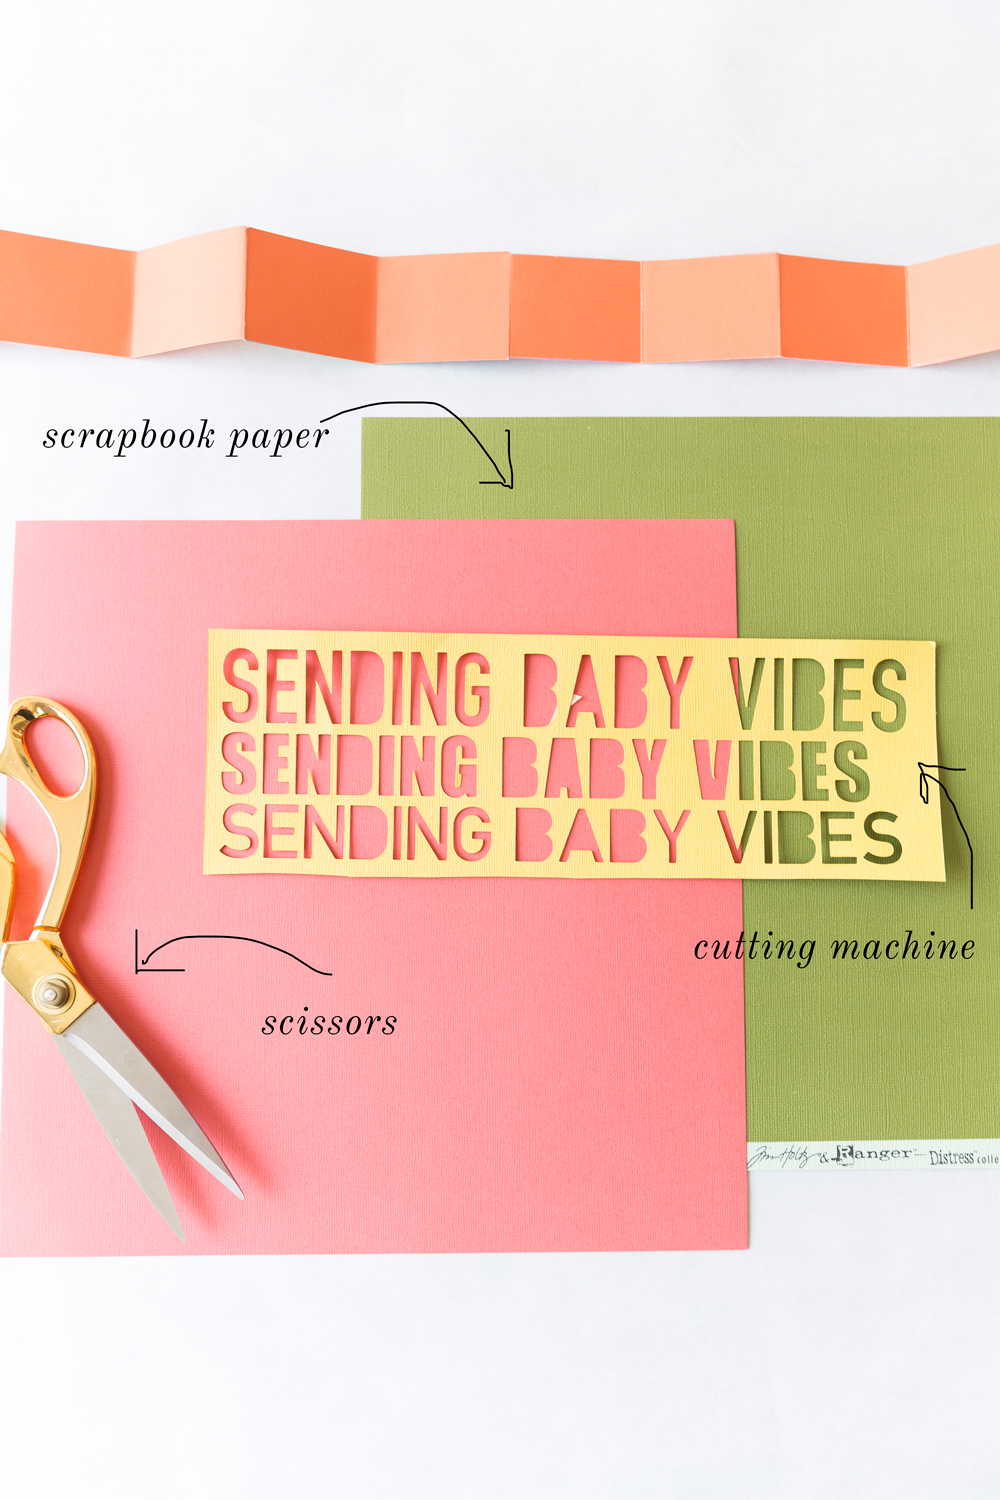 Send some literal baby vibes with this cute care package idea